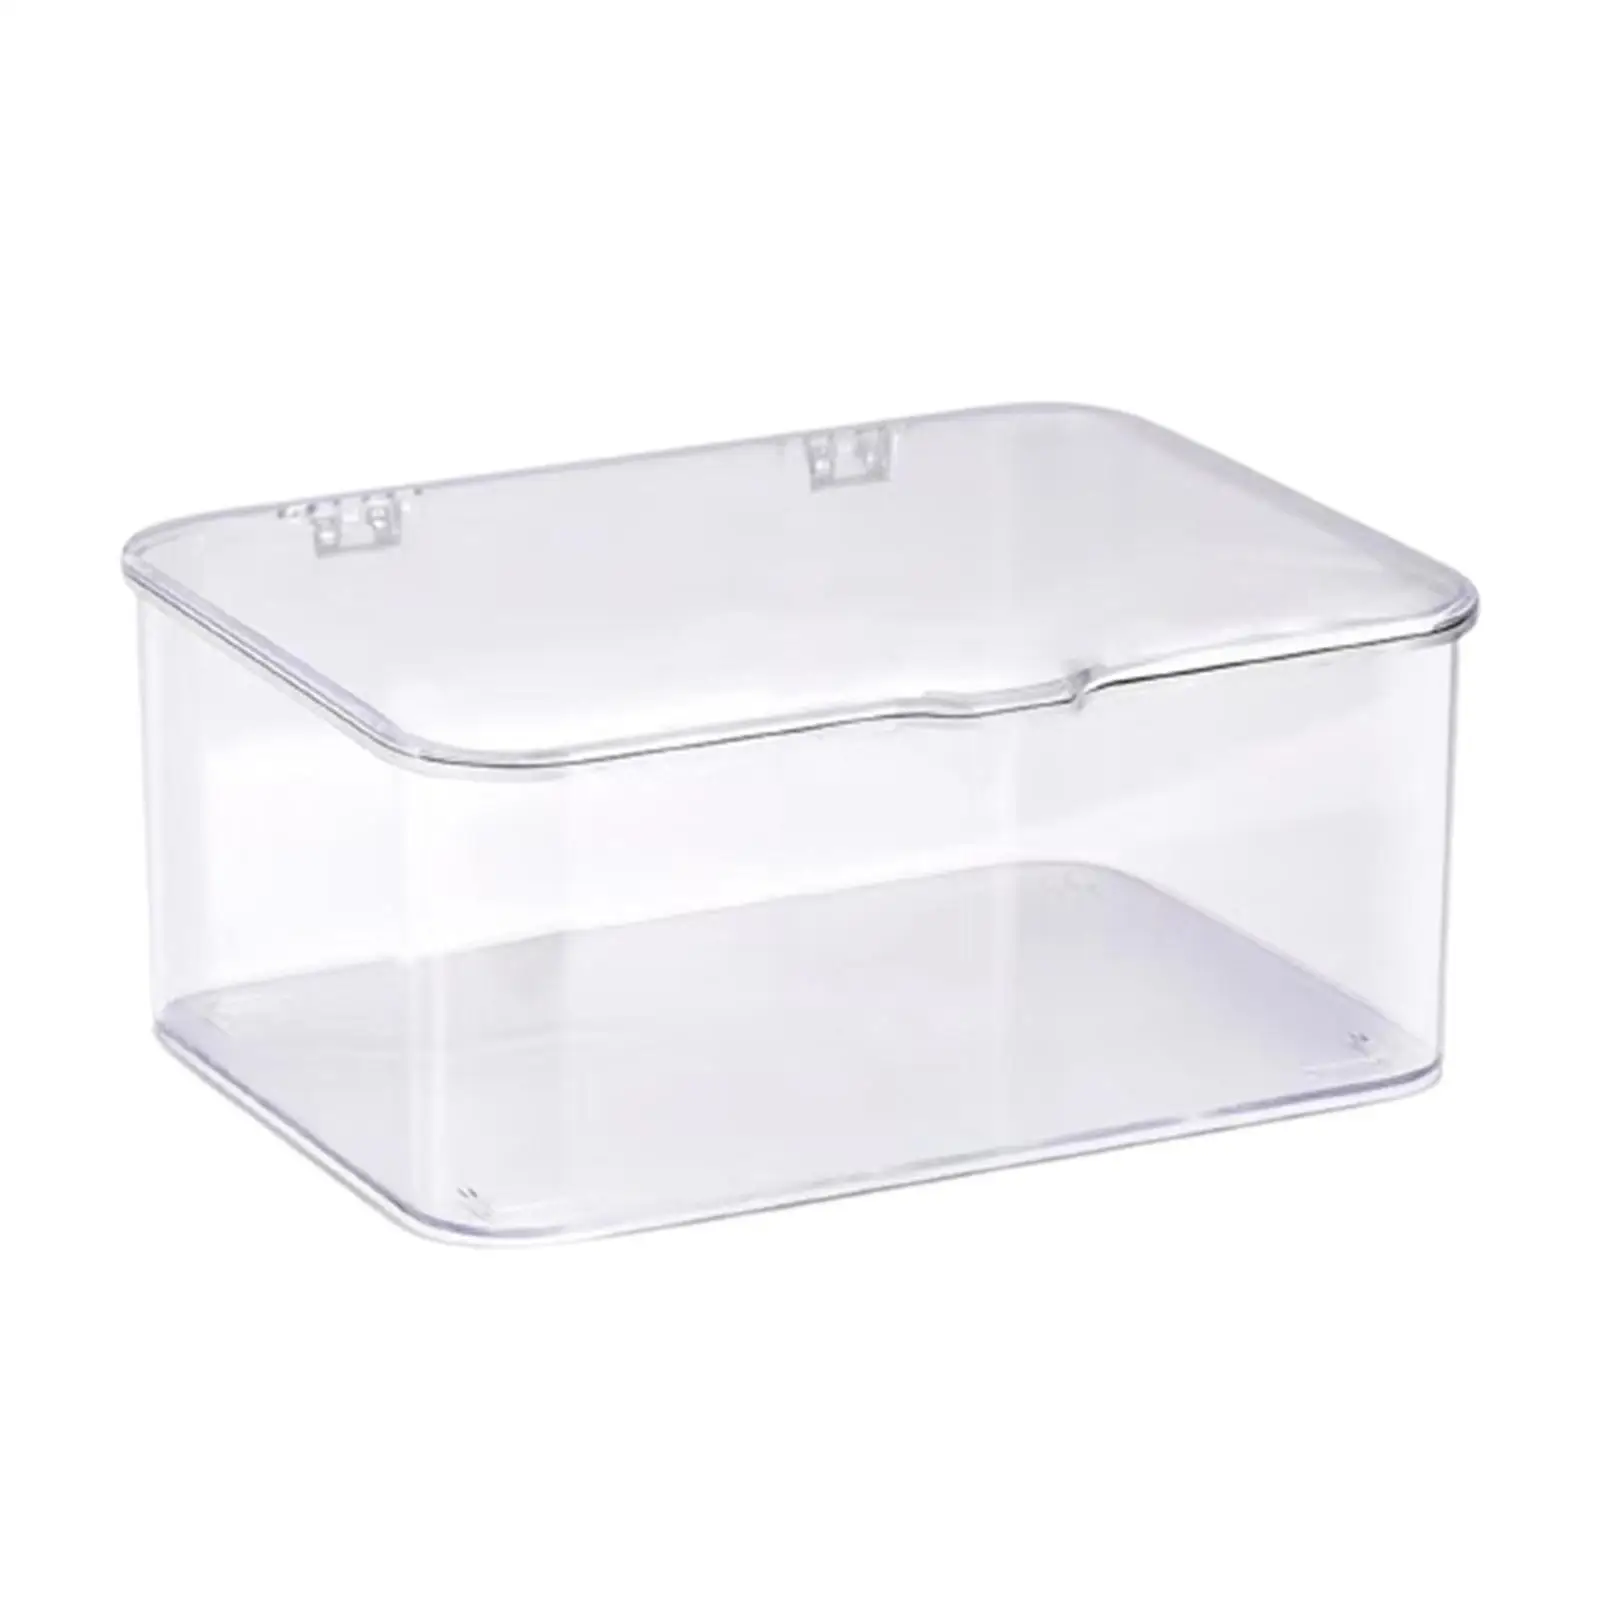 Clear Storage Box Organizer Jewelry Case Accessory Functional Sturdy Durable for Bathroom, Craft Room Versatile Stacking Drawer